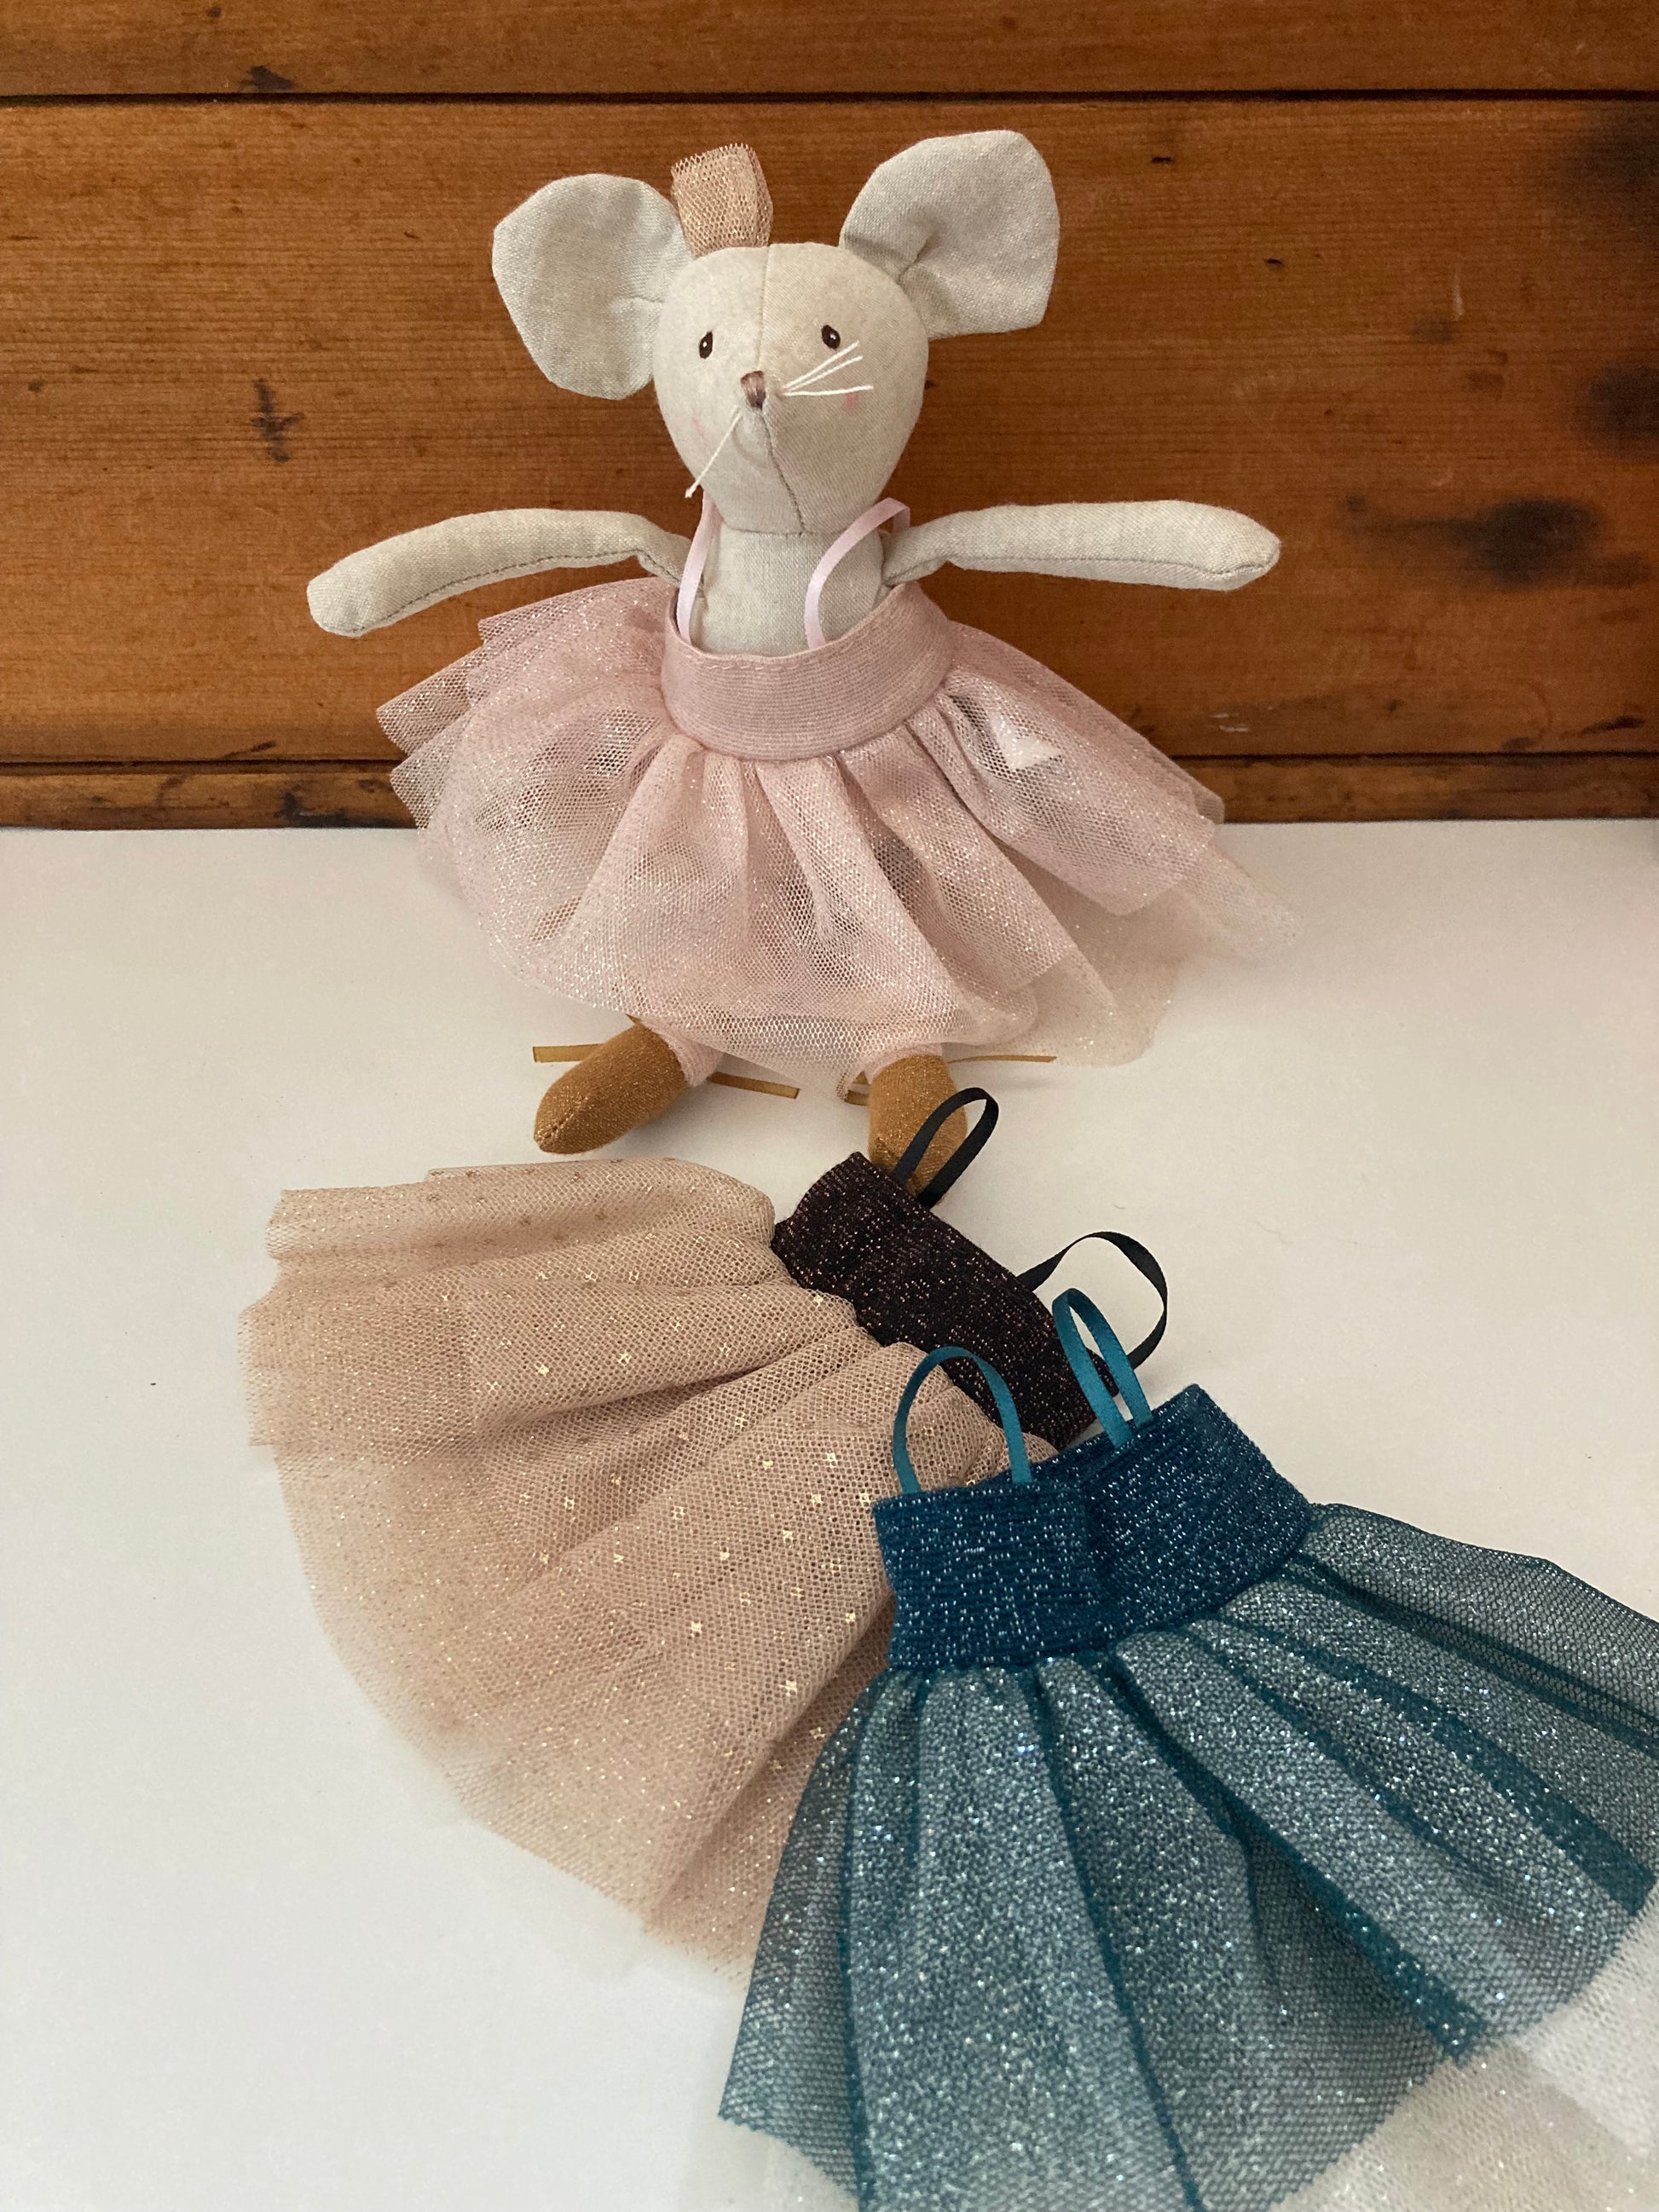 Suitcase - Tutus - The Little School Of Dance - Doll - Moulin Roty